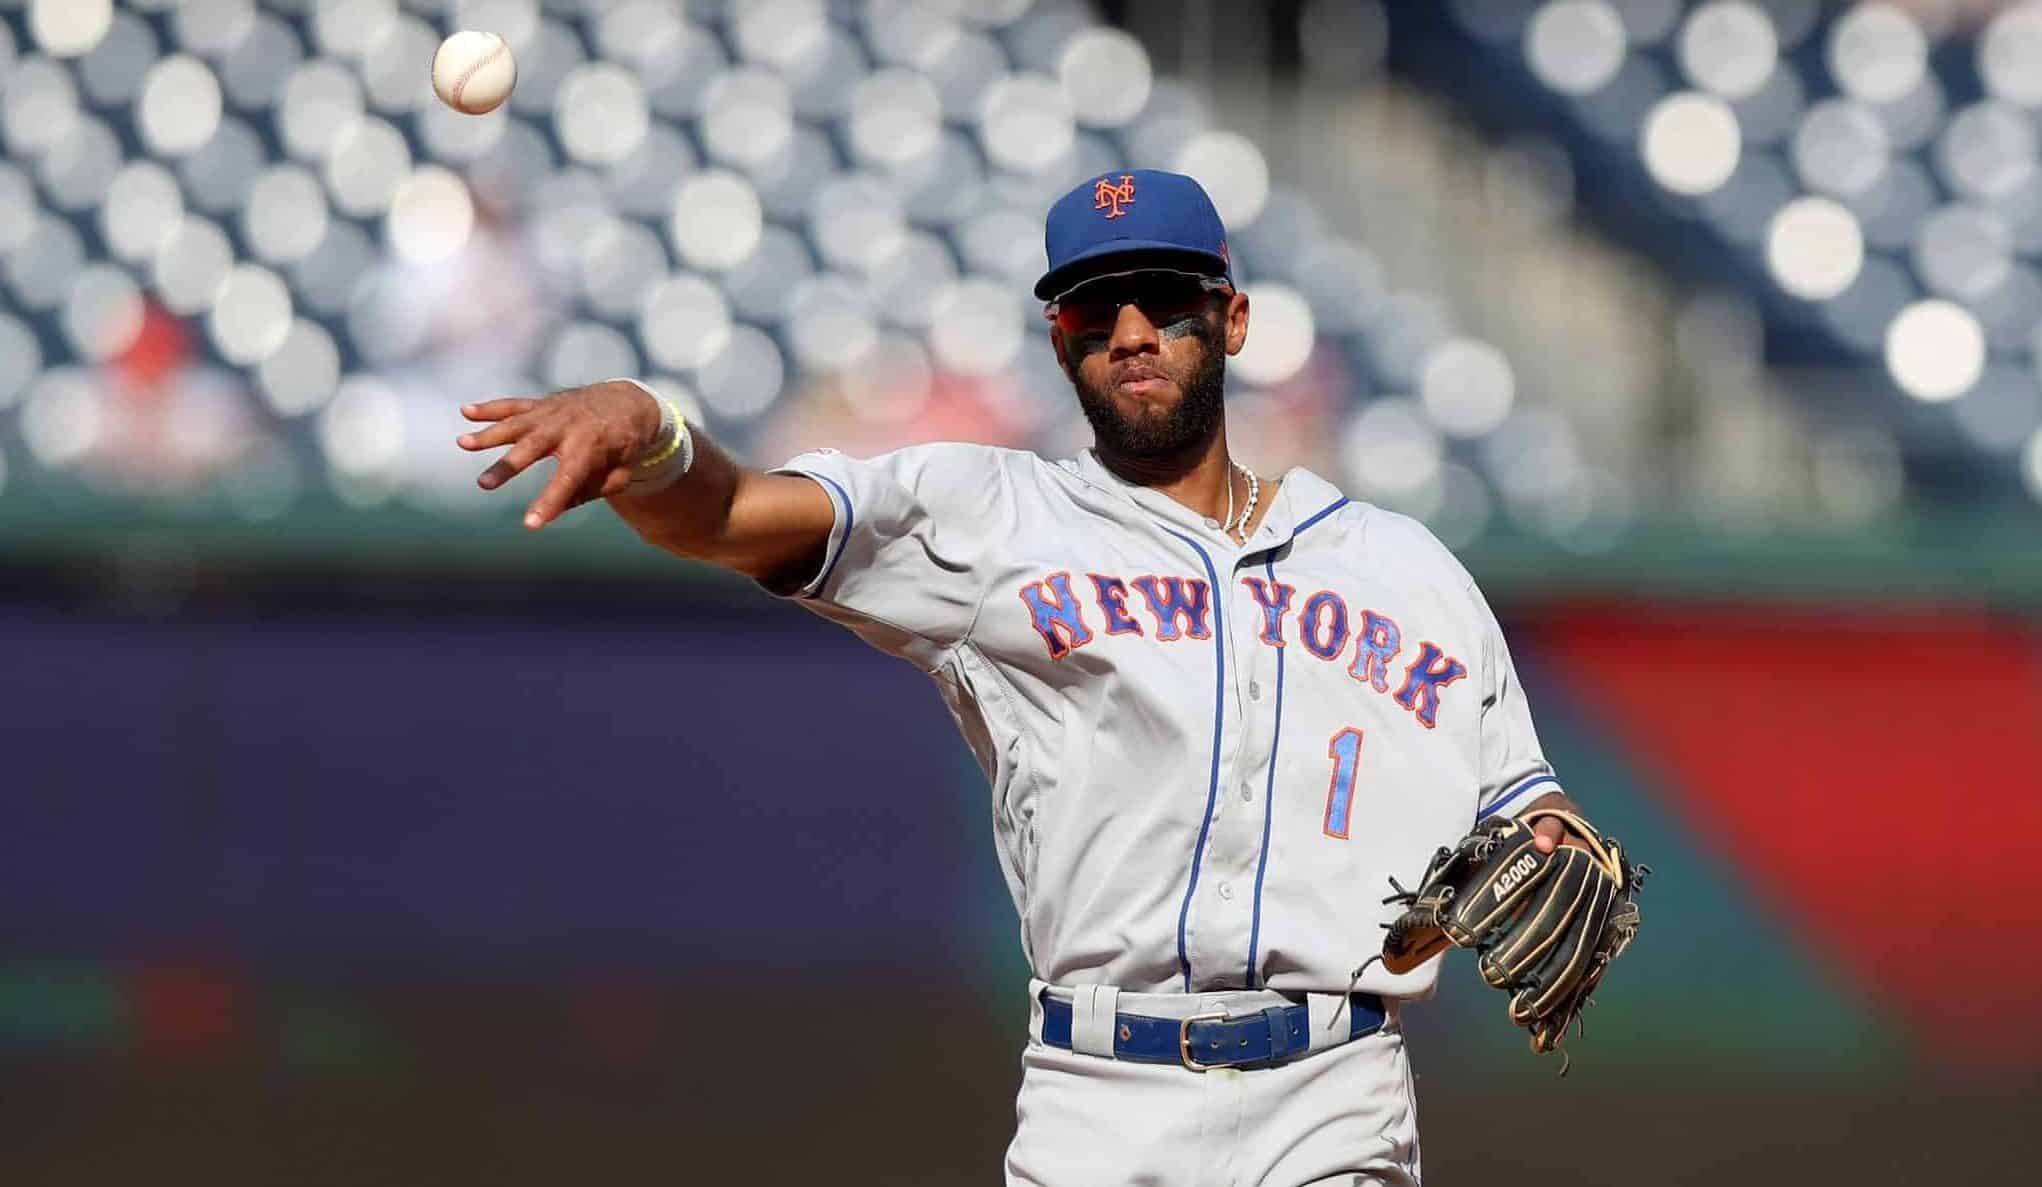 WASHINGTON, DC - SEPTEMBER 04: Amed Rosario #1 of the New York Mets throws the ball in against the Washington Nationals at Nationals Park on September 04, 2019 in Washington, DC.